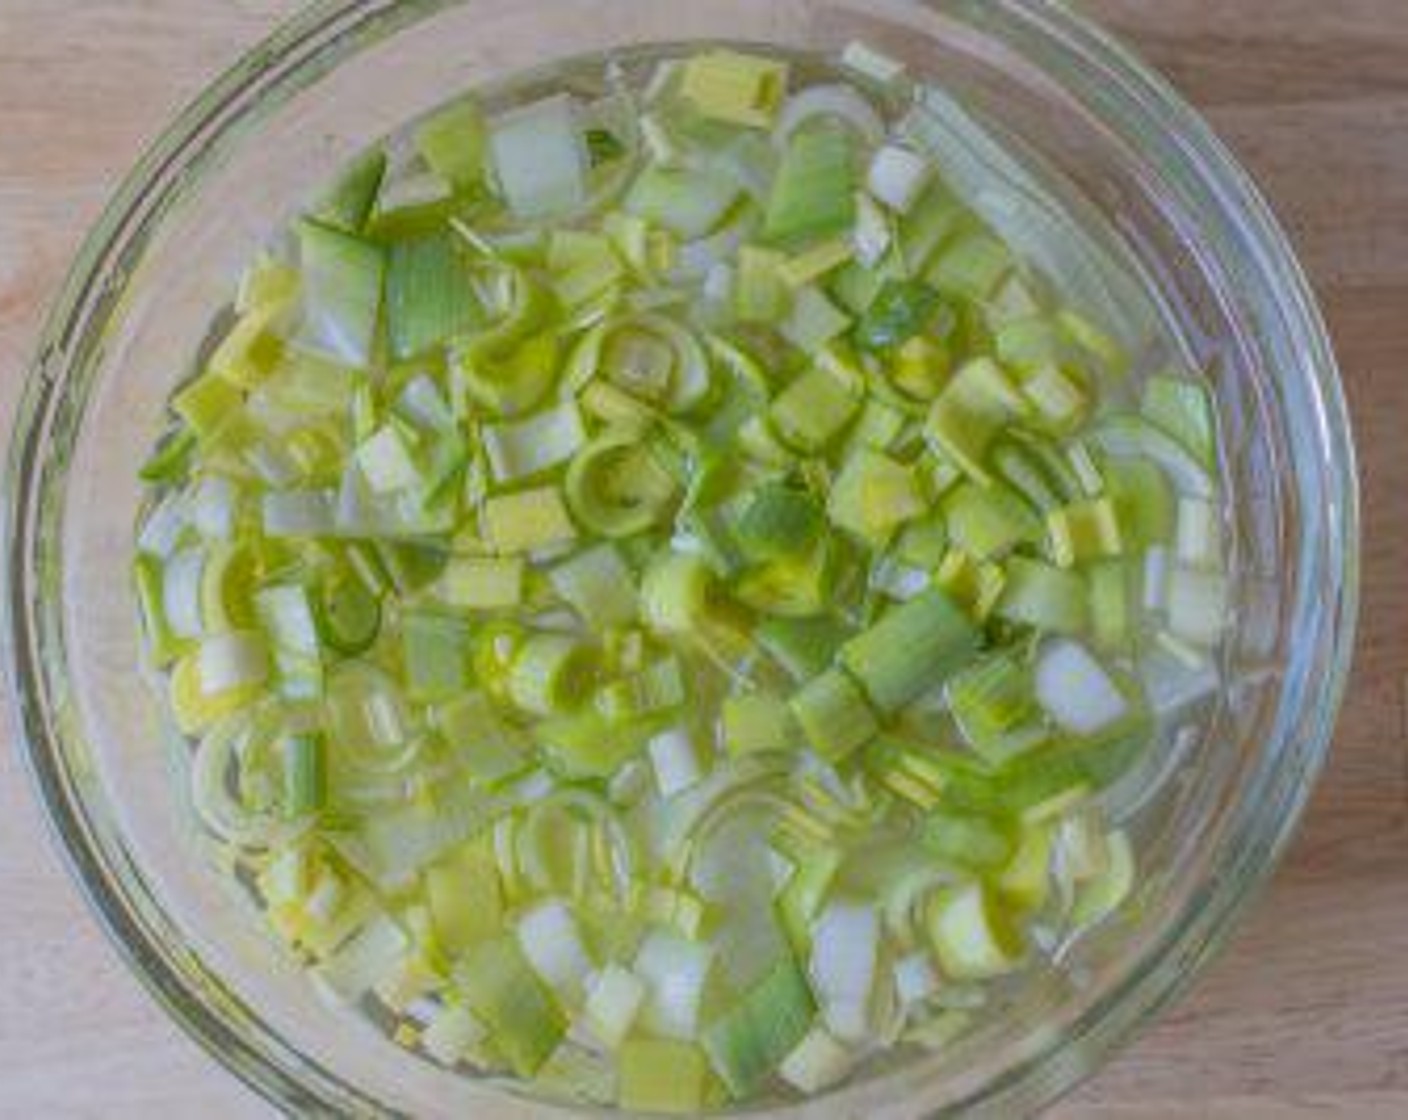 step 1 Cut off the dark green stem and the root off the Leek (1) .Cut the white and light green parts only of the leek lengthwise down the middle, then cut into ½ inch half moons slices. Place leek pieces in a large bowl of water and separate the pieces with your hands to clean the dirt off. Lift the cleaned pieces out of the dirty water and set aside. Throw out the dirty water.